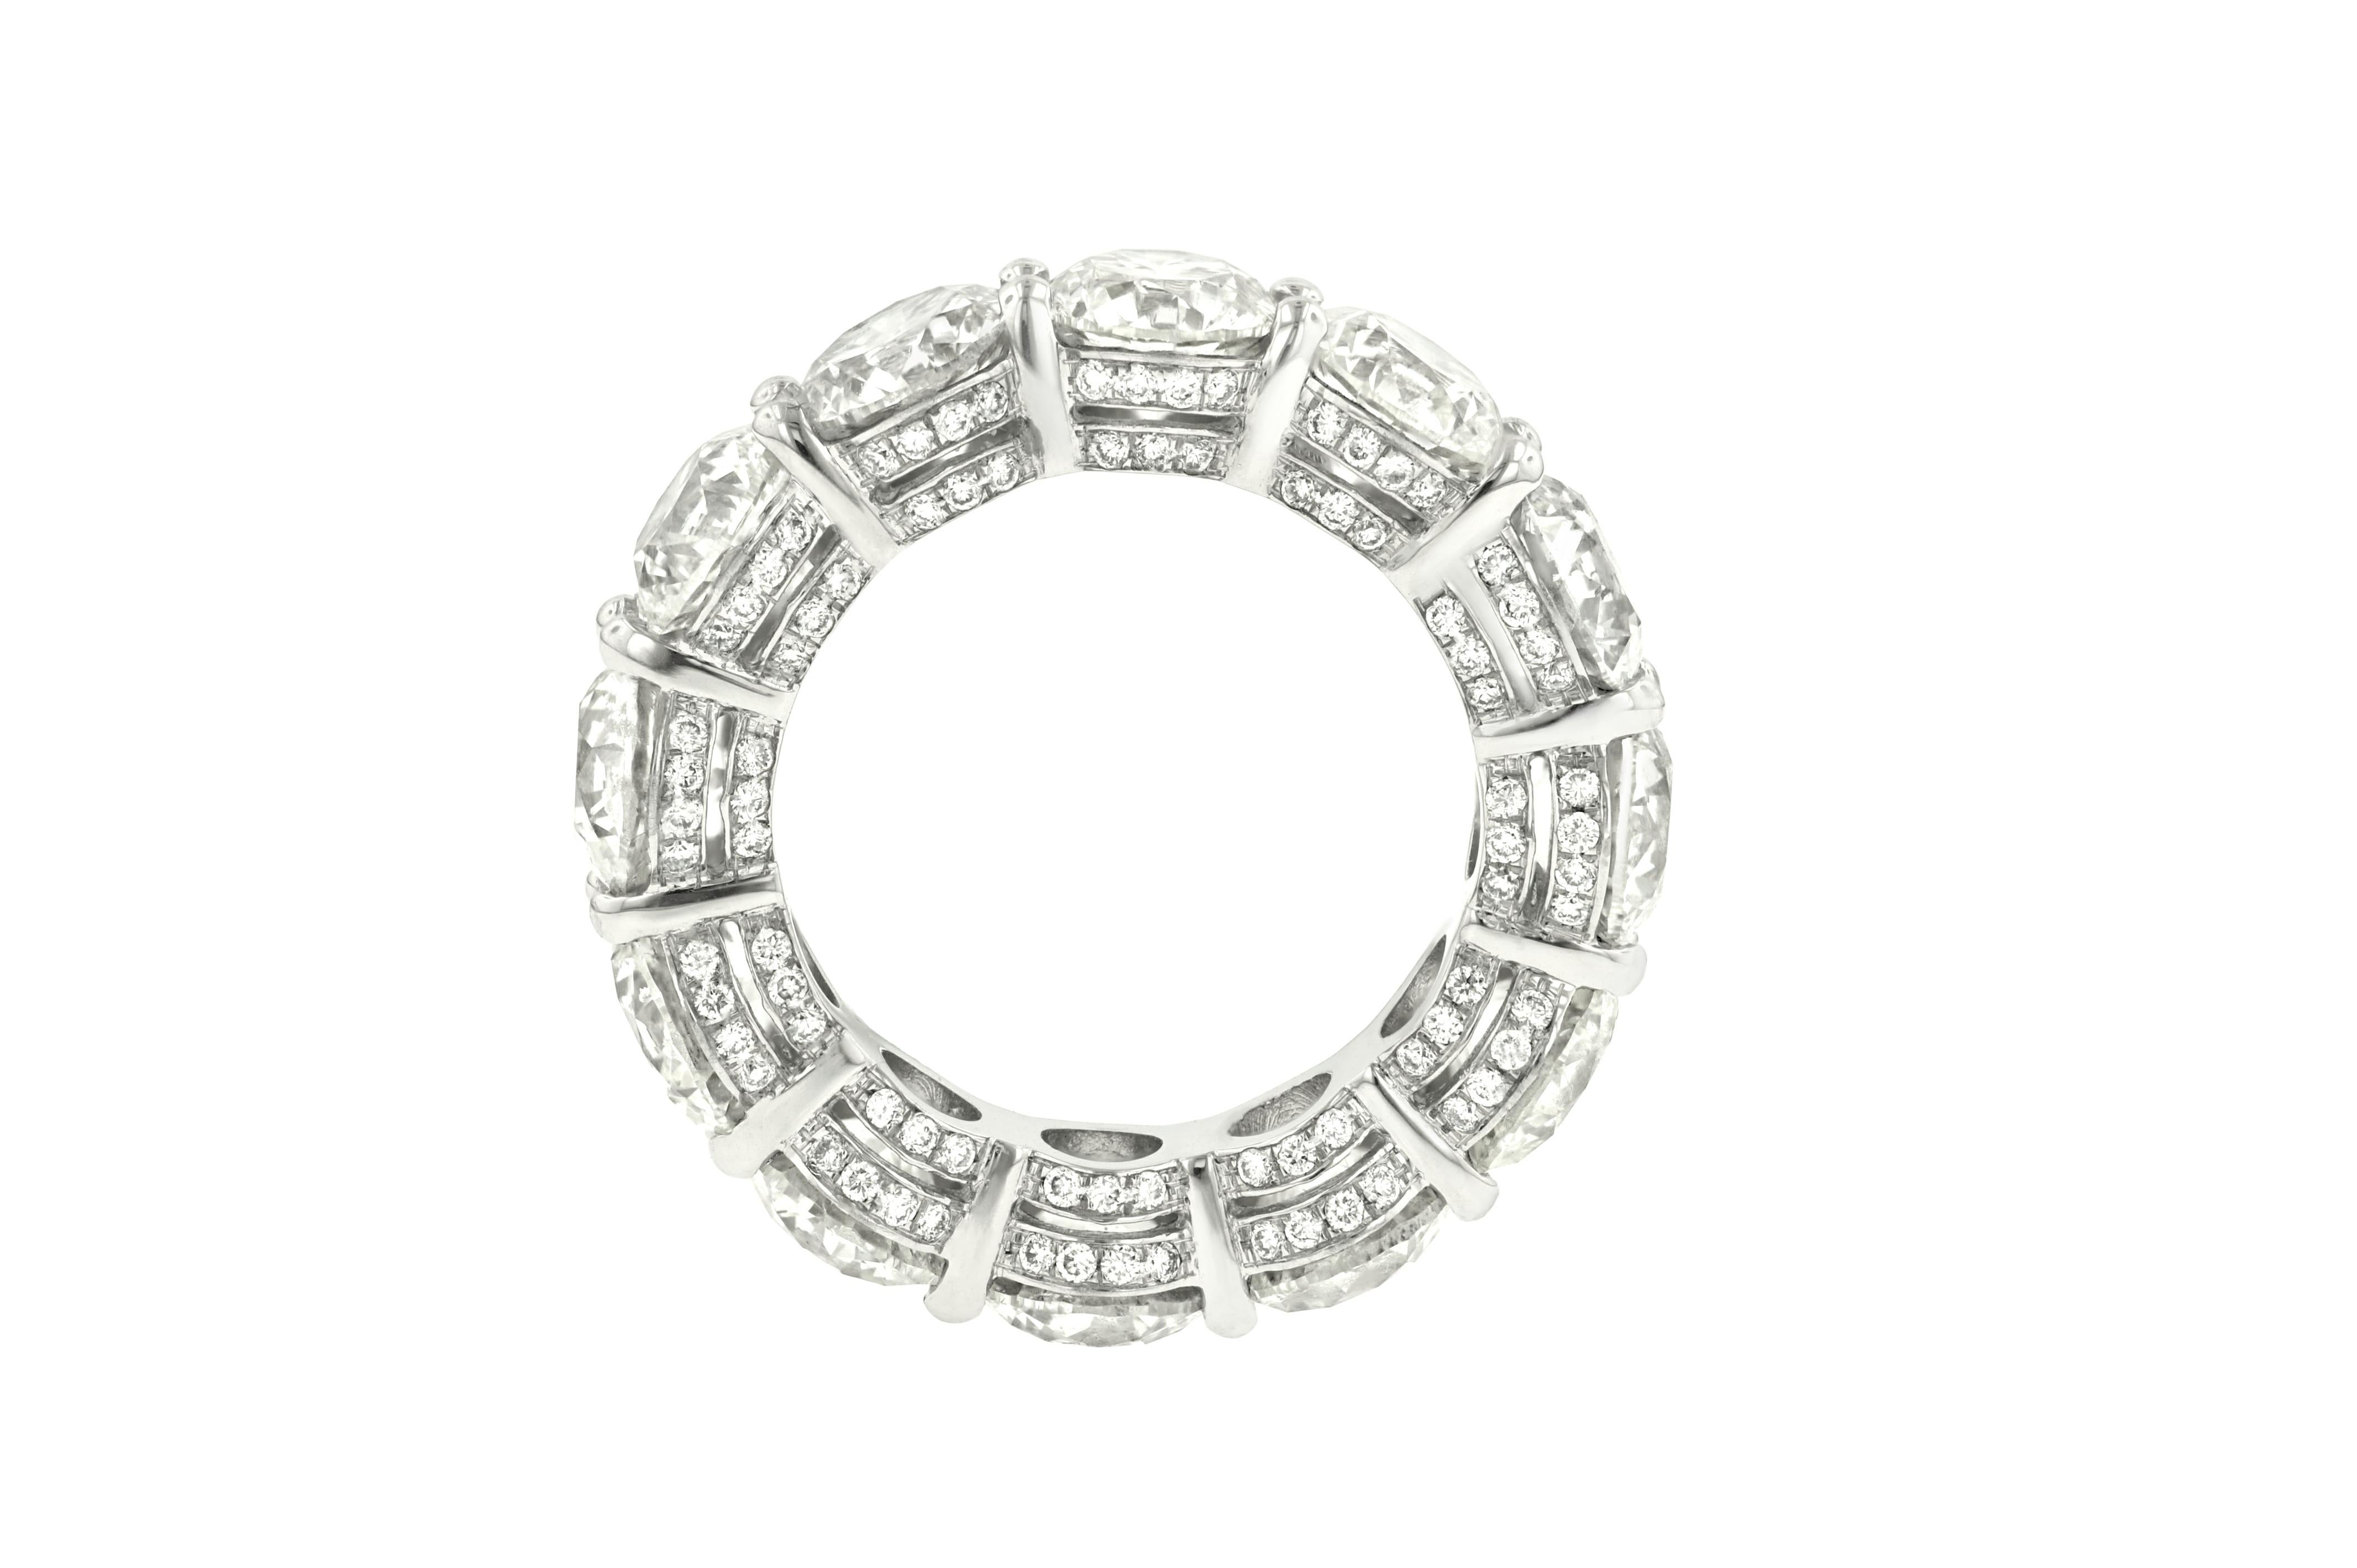 Platinum Diamond Eternity Band features 10.85 Carats of Round Brilliant cut diamonds, surrounded by 0.85 Carats of Diamonds. 12 stones total. The Diamond are G-H in Color SI in Clarity. 

